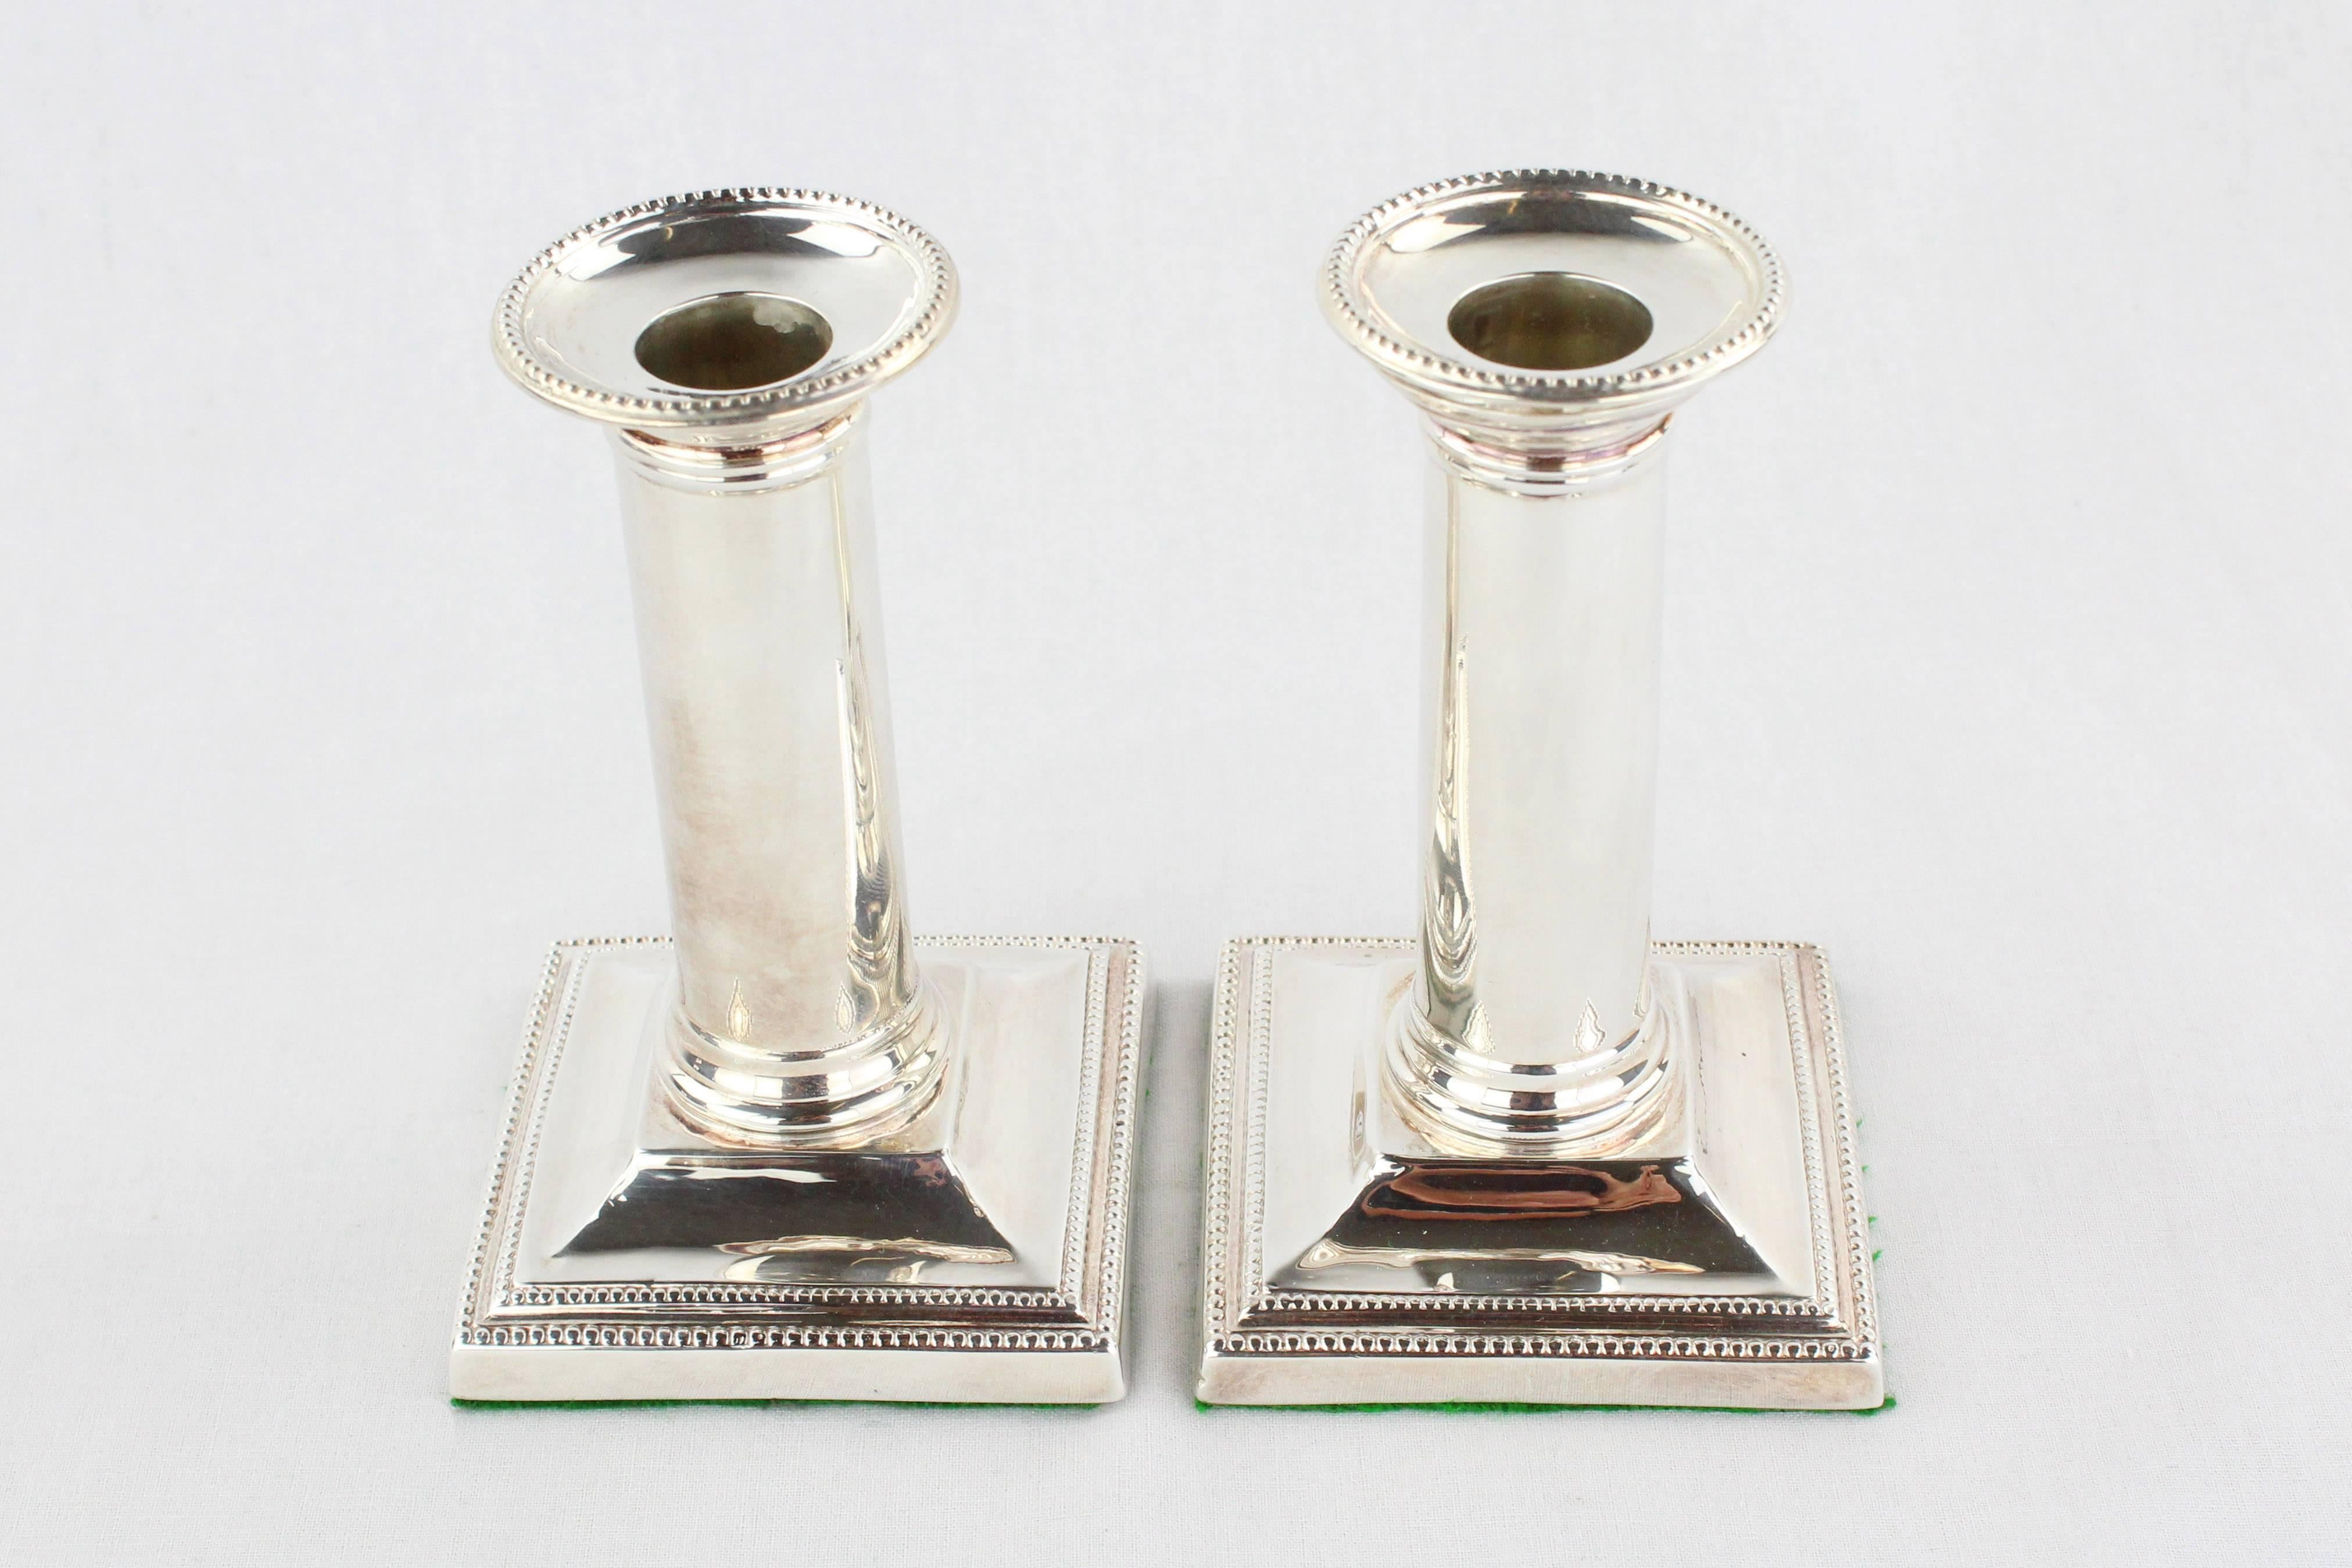 English Hallmarked Pair of Candlesticks, 925 Sterling Silver, London, 1900